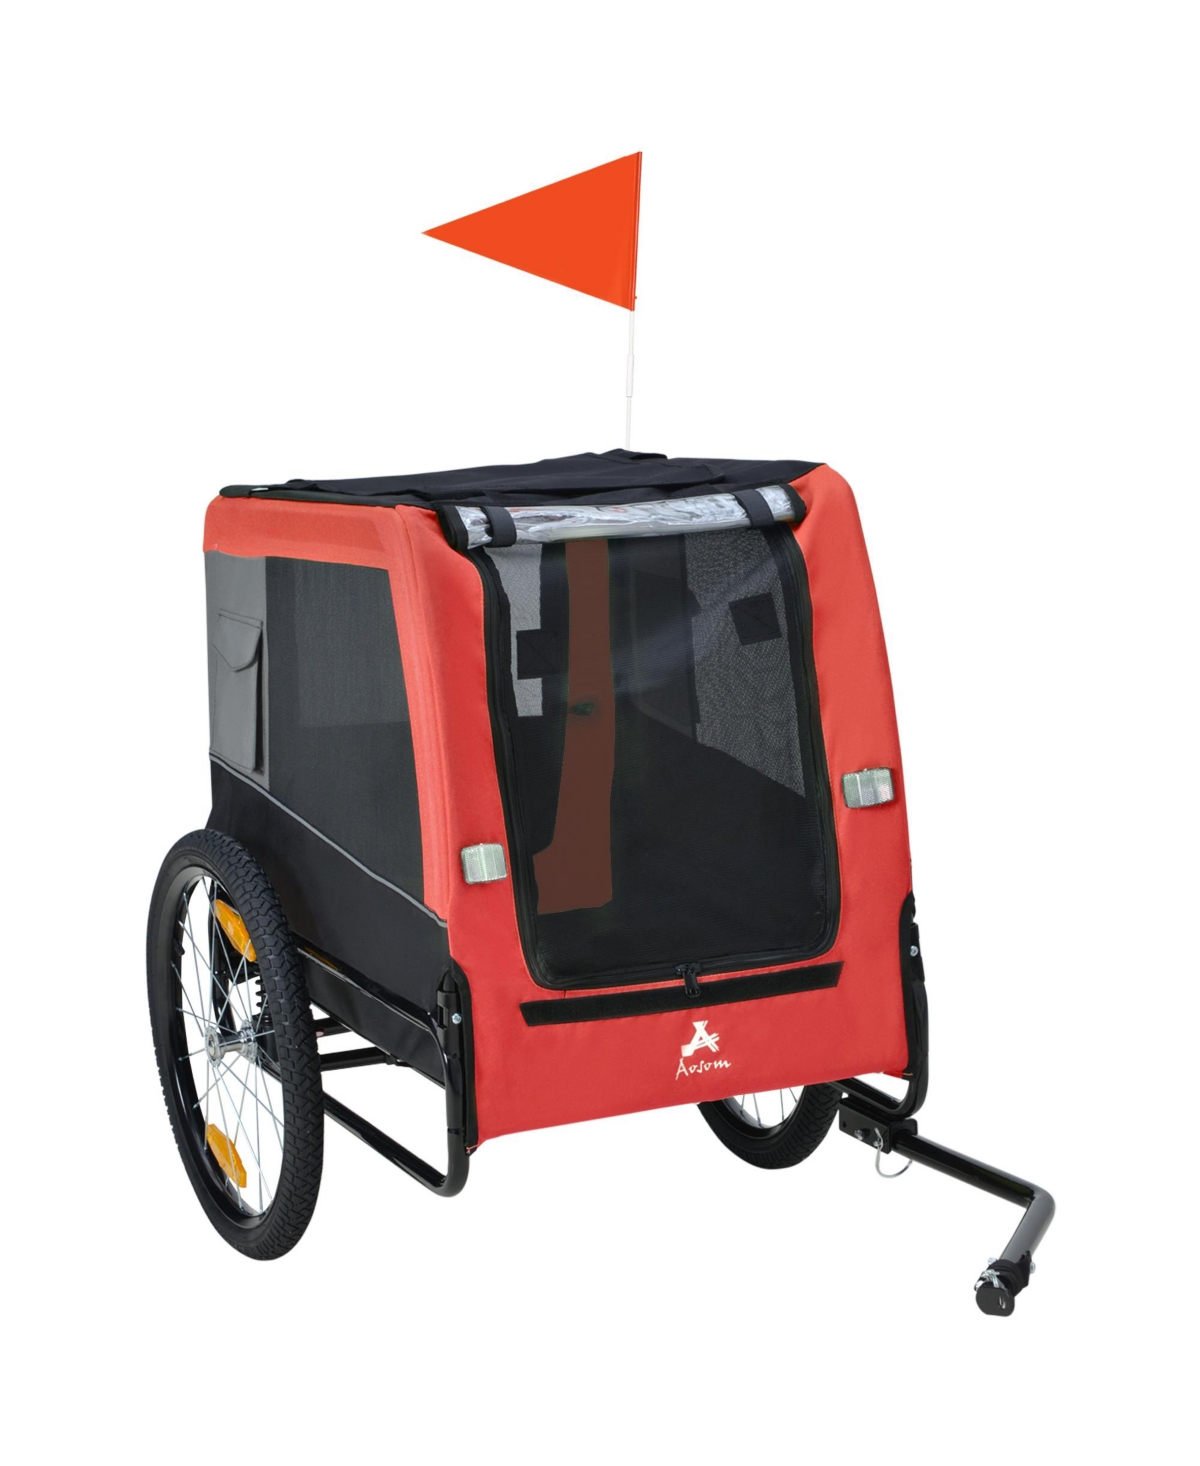 Dog Bike Trailer with Suspension System, Hitch for Medium Dogs - Red